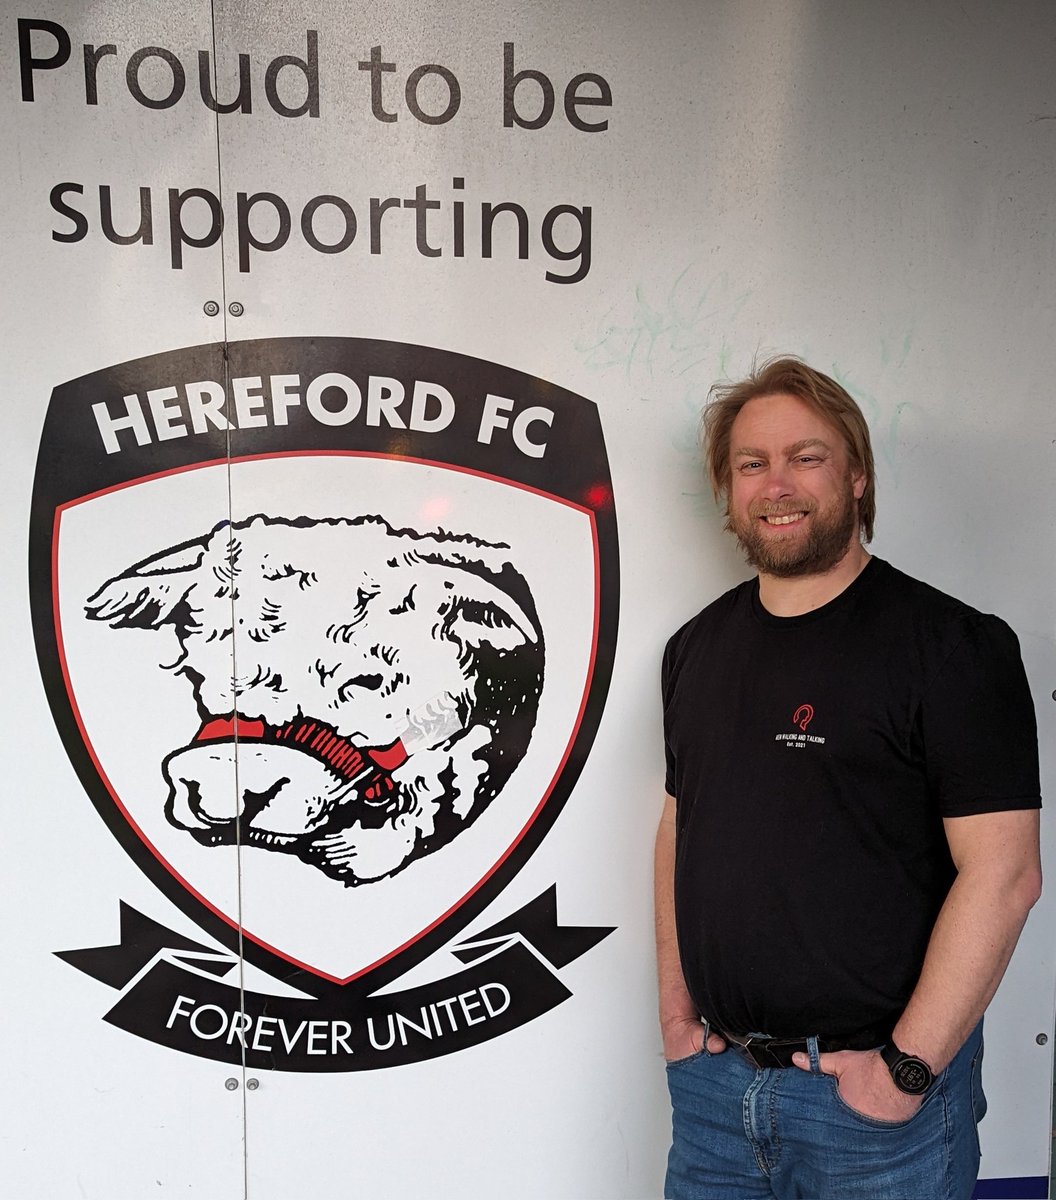 Excellent evening with Men Walking and Talking. Very proud to be a director of the CIC, seeing the group grow around the country is great to see. In May I shall be signing the Armed Forces Covenant on their behalf with @WMRFCA MWAT #Hereford are proudly supported by @HerefordFC